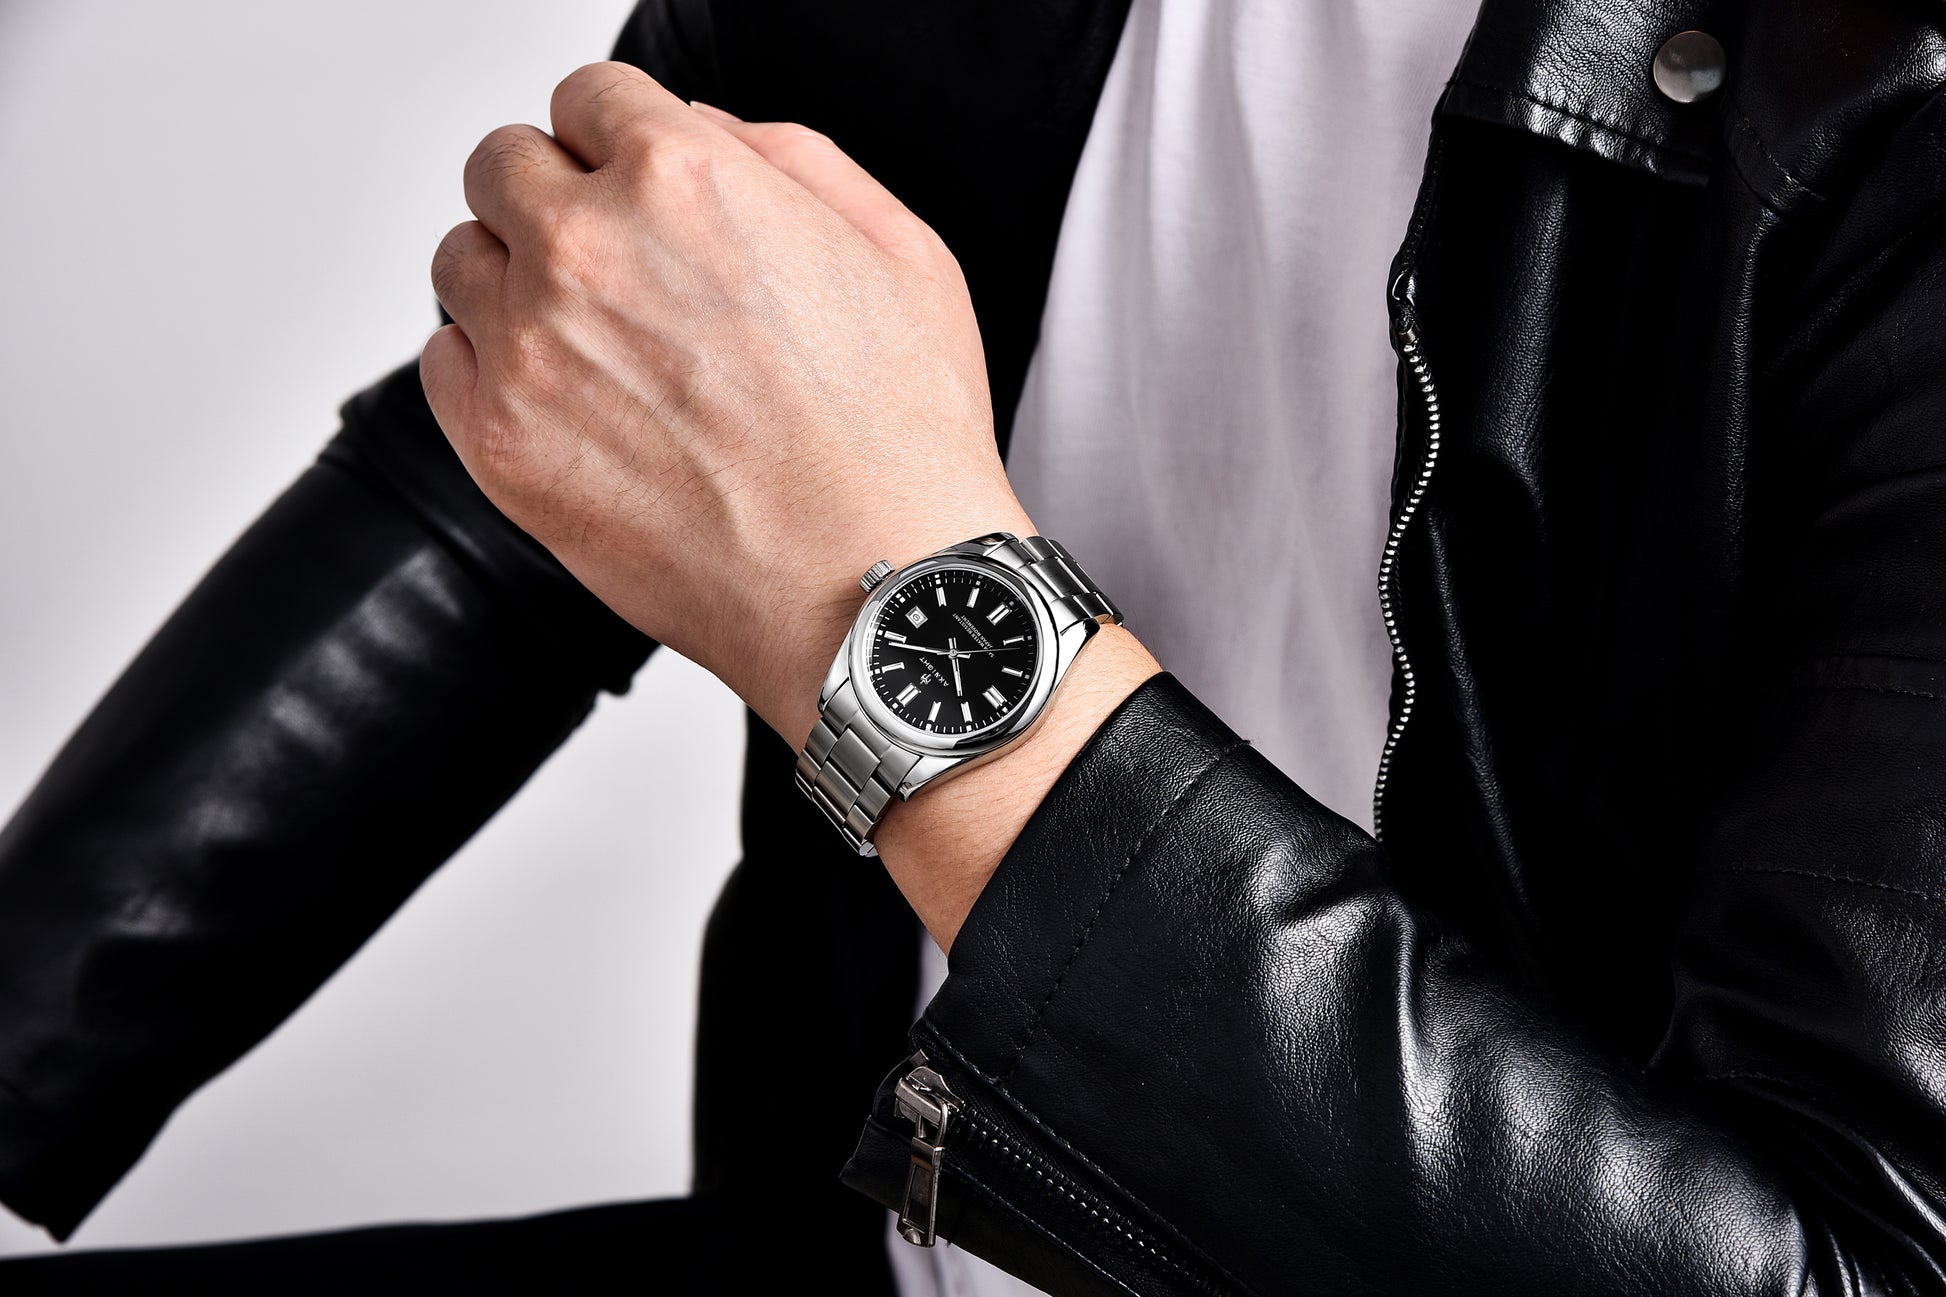 Buy online Black Day & Date Functional Watch For Men's from